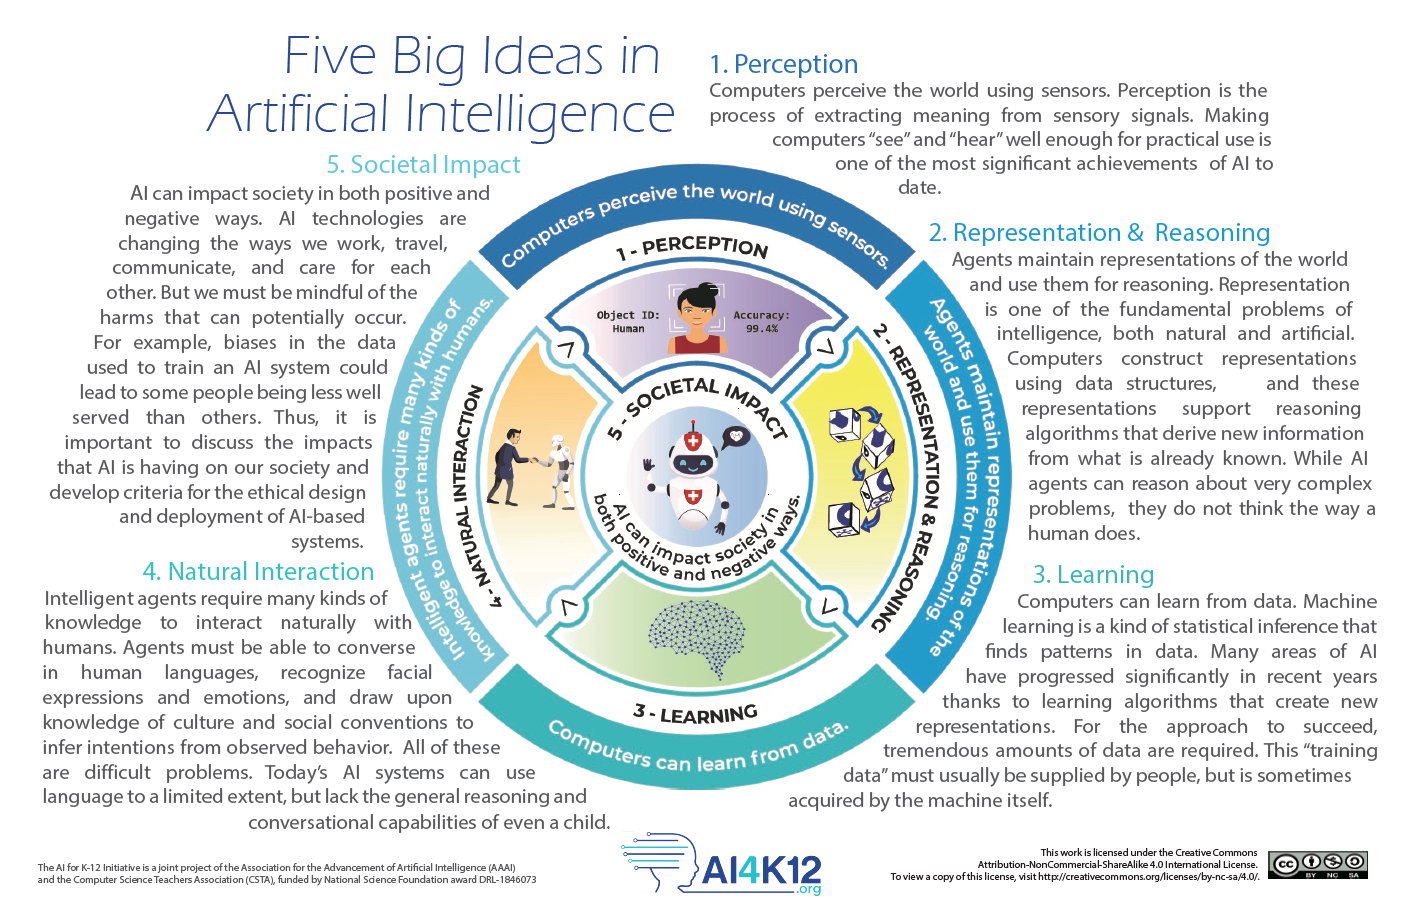 infographic of the five big ideas in artificial intelligence